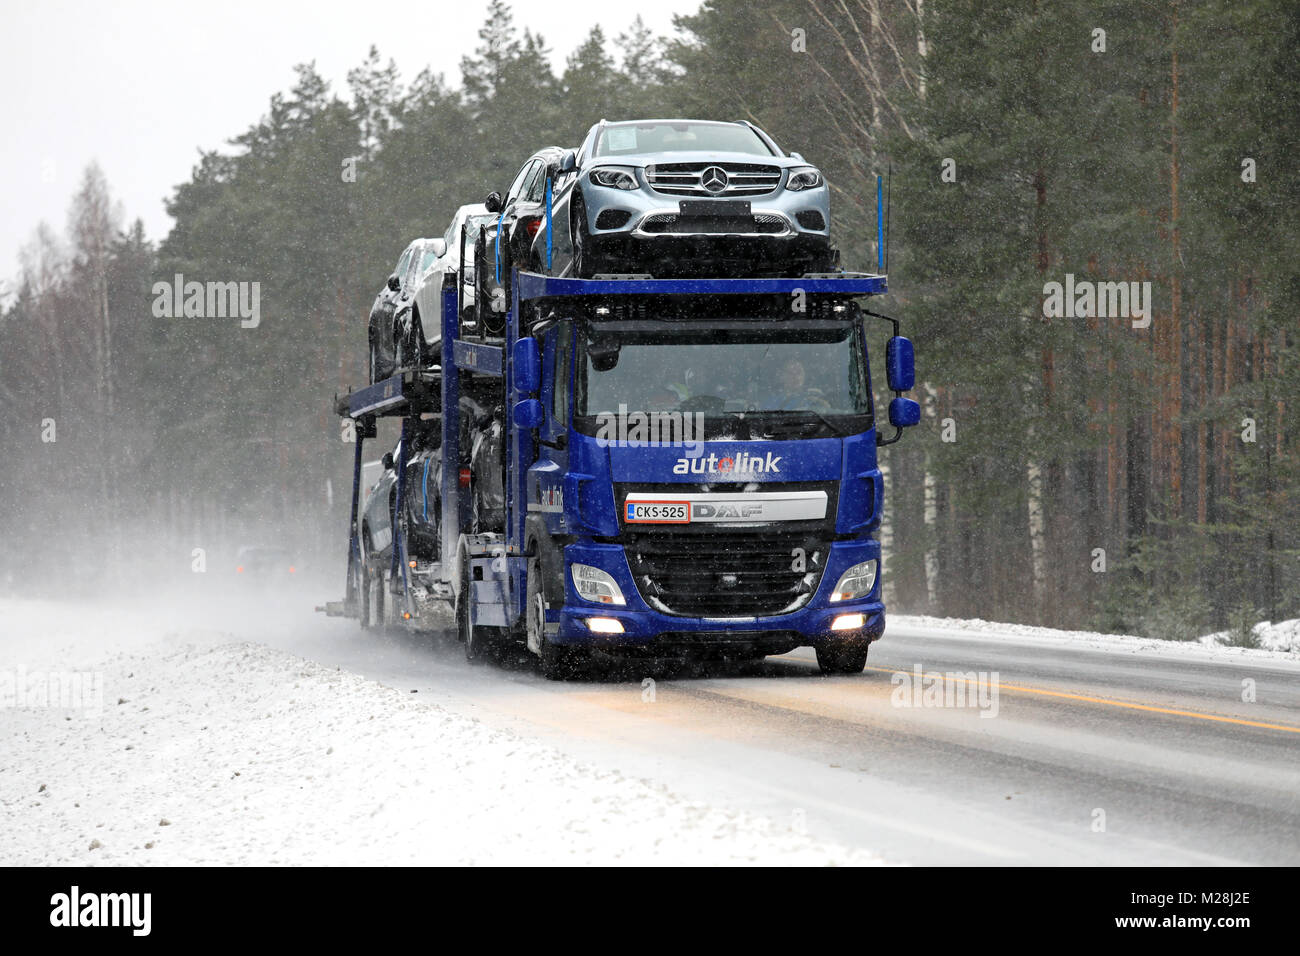 SALO, FINLAND - FEBRUARY 3, 2018: DAF CF car carrier of Autolink transports new Mercedes-Benz cars along road in sleet and snow. Stock Photo